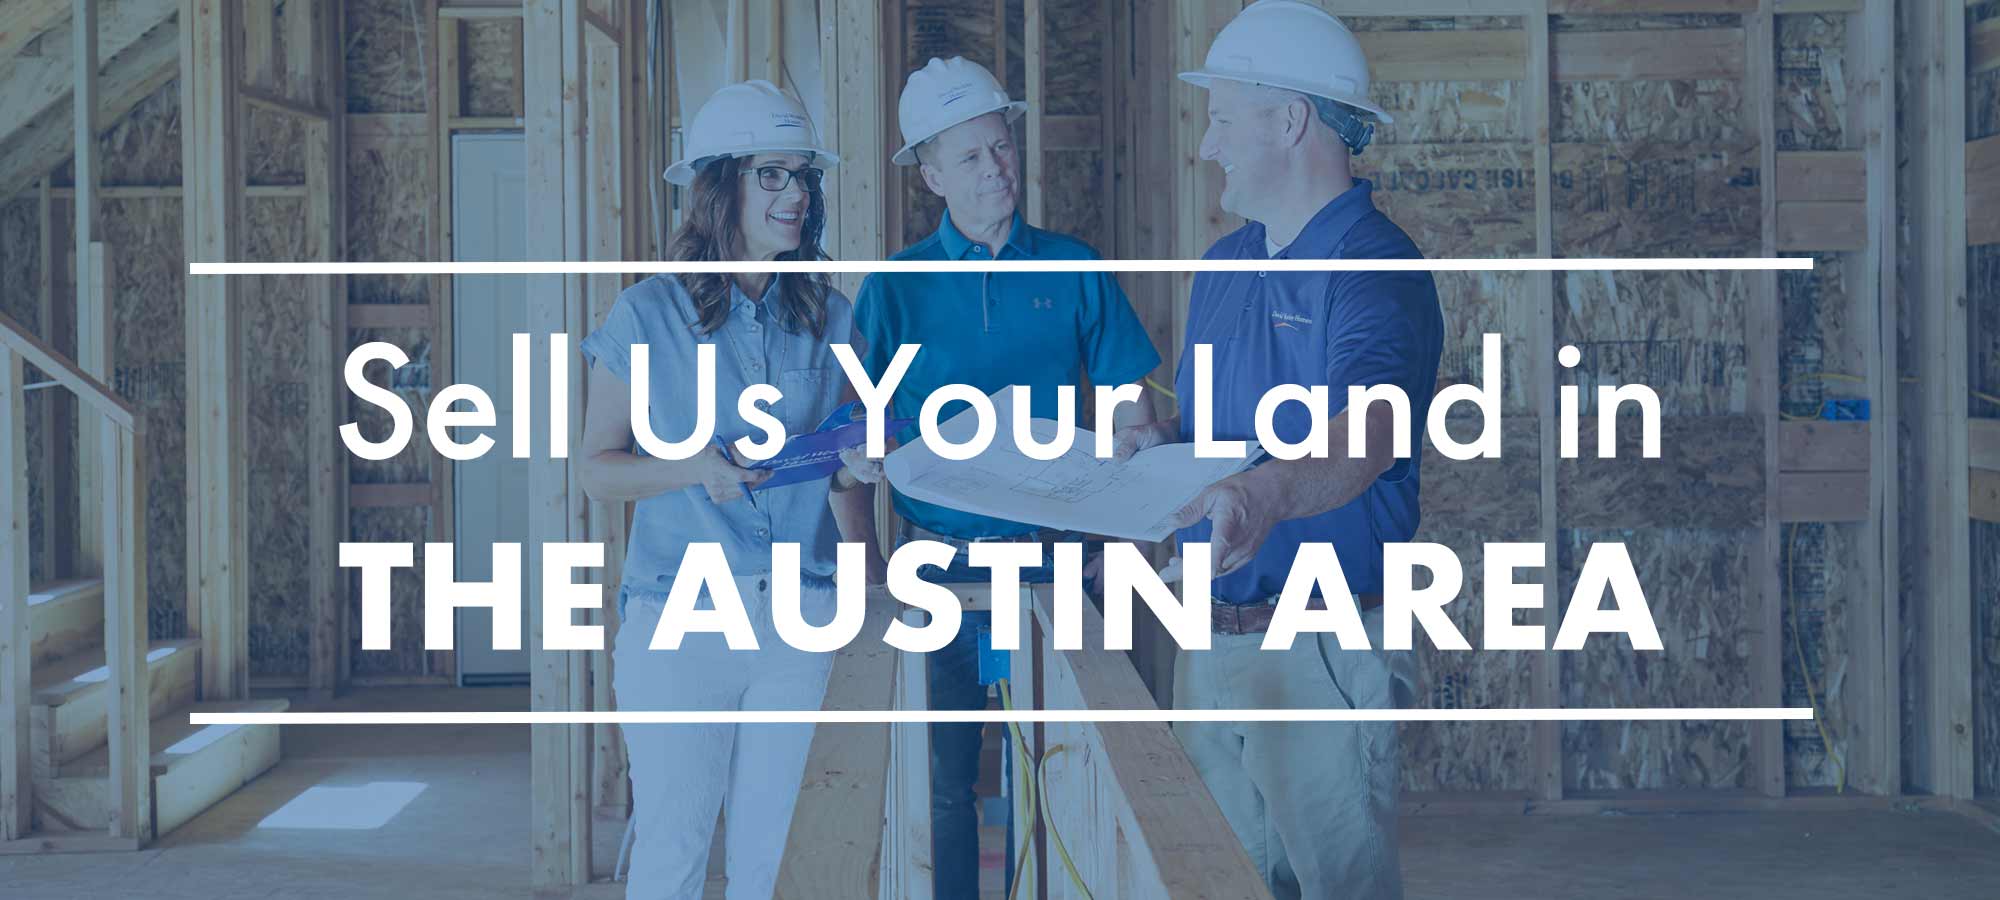 Sell Us Your Land in the Austin Area